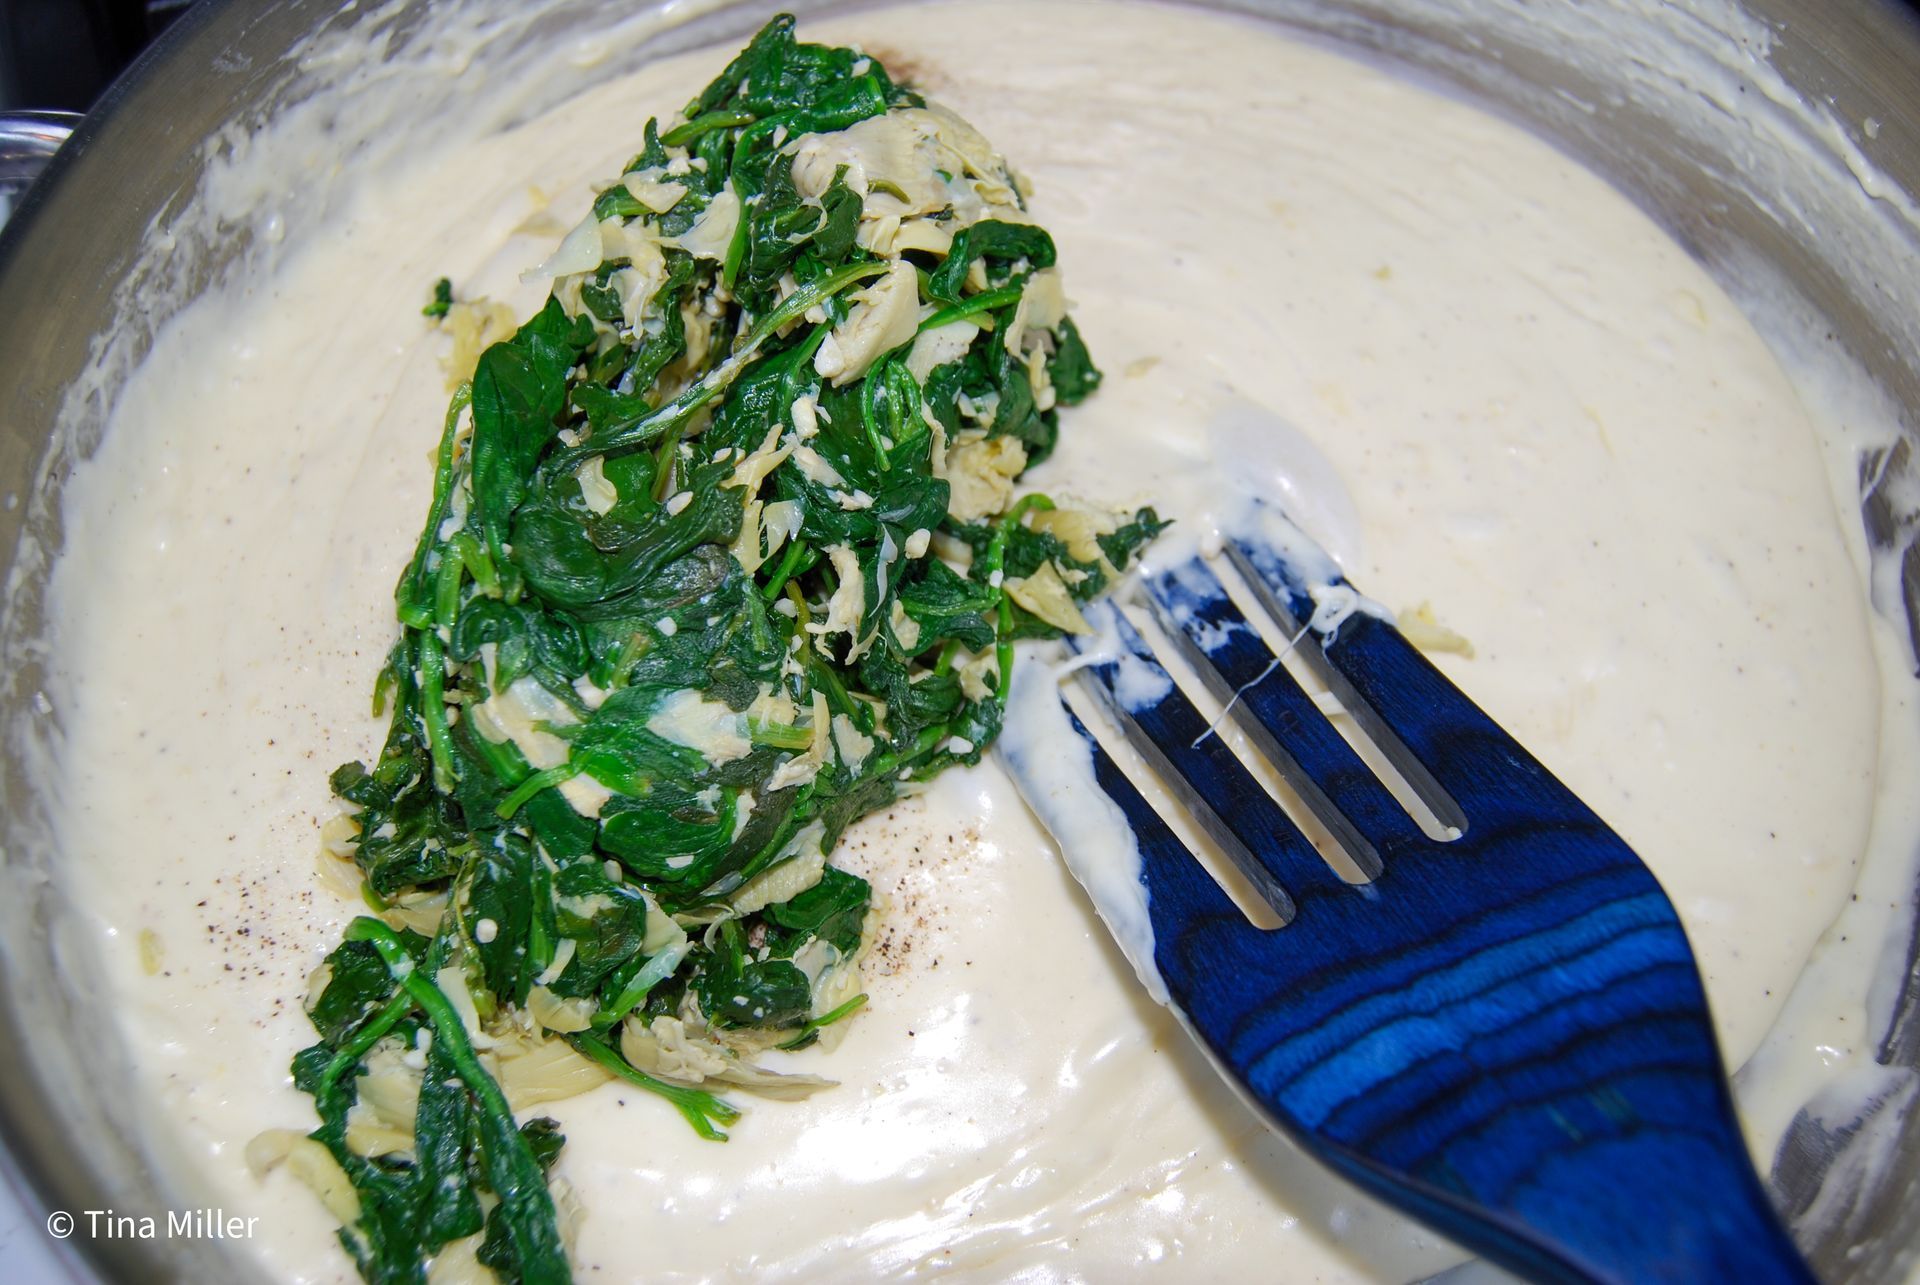 sautéed spinach and artichoke hearts being added to a creamy cheese mixture and being stirred with a blue wooden spatula.